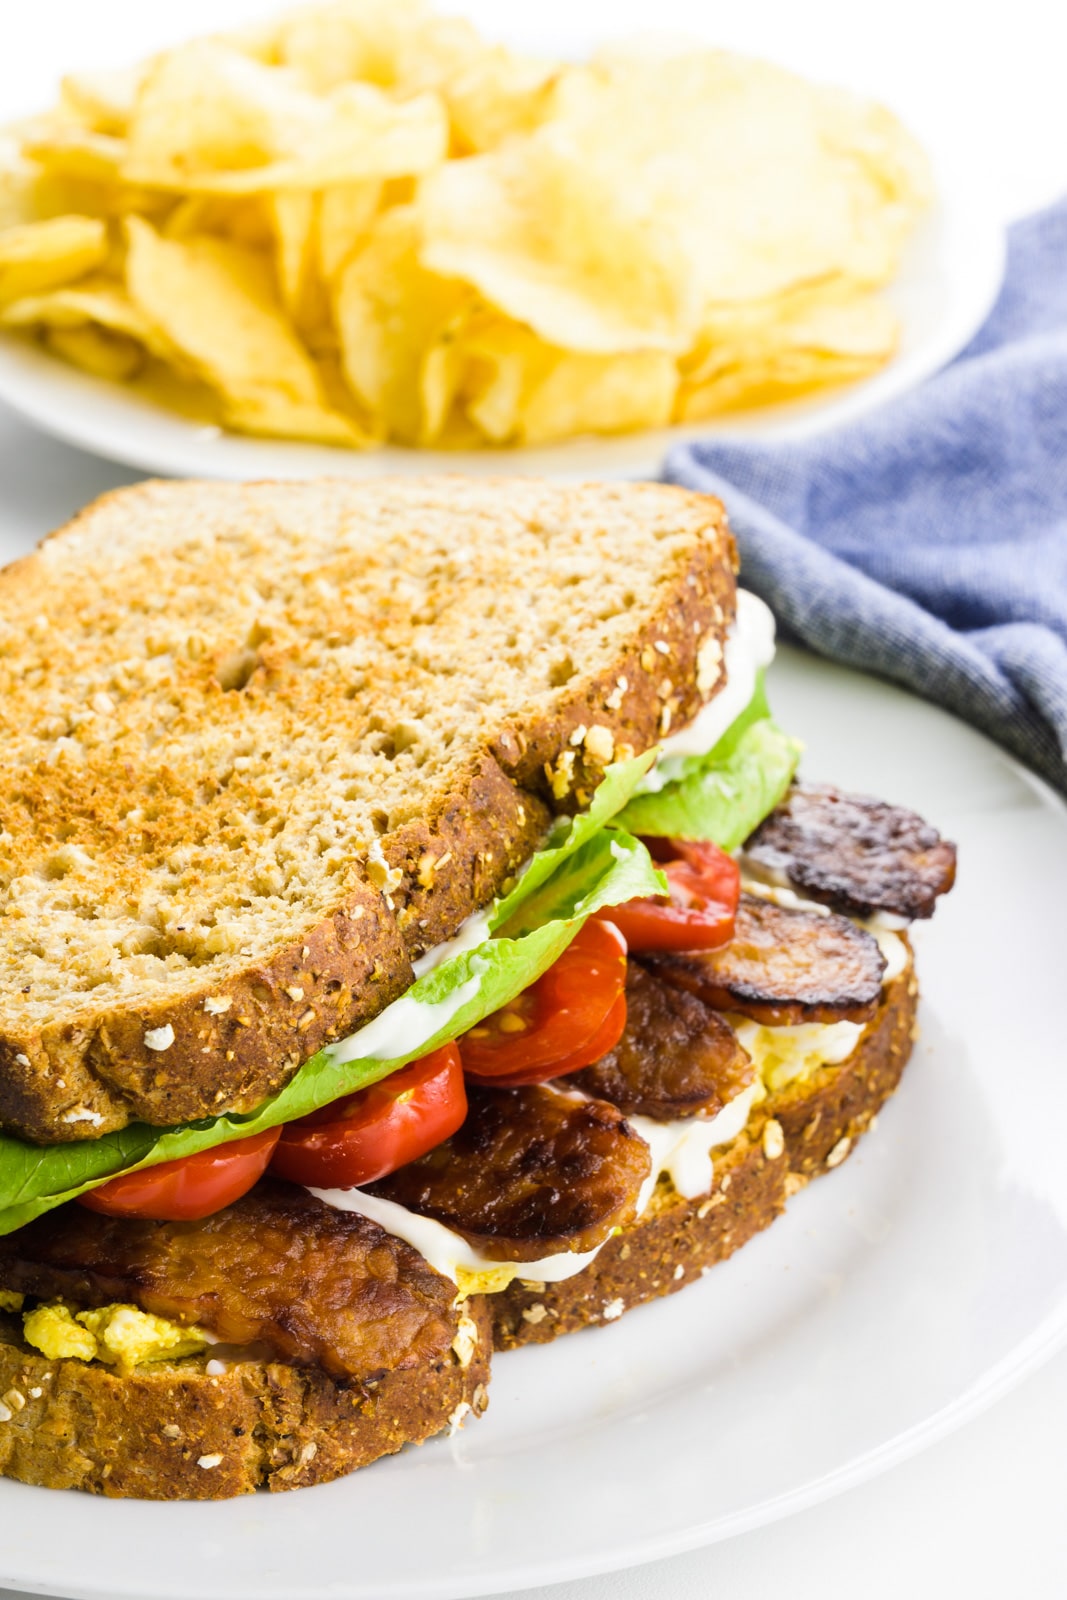 A sandwich has layers of ingredients, such as tomatoes, lettuce and mayo. There's a plate of potato chips next to a blue kitchen towel in the background.